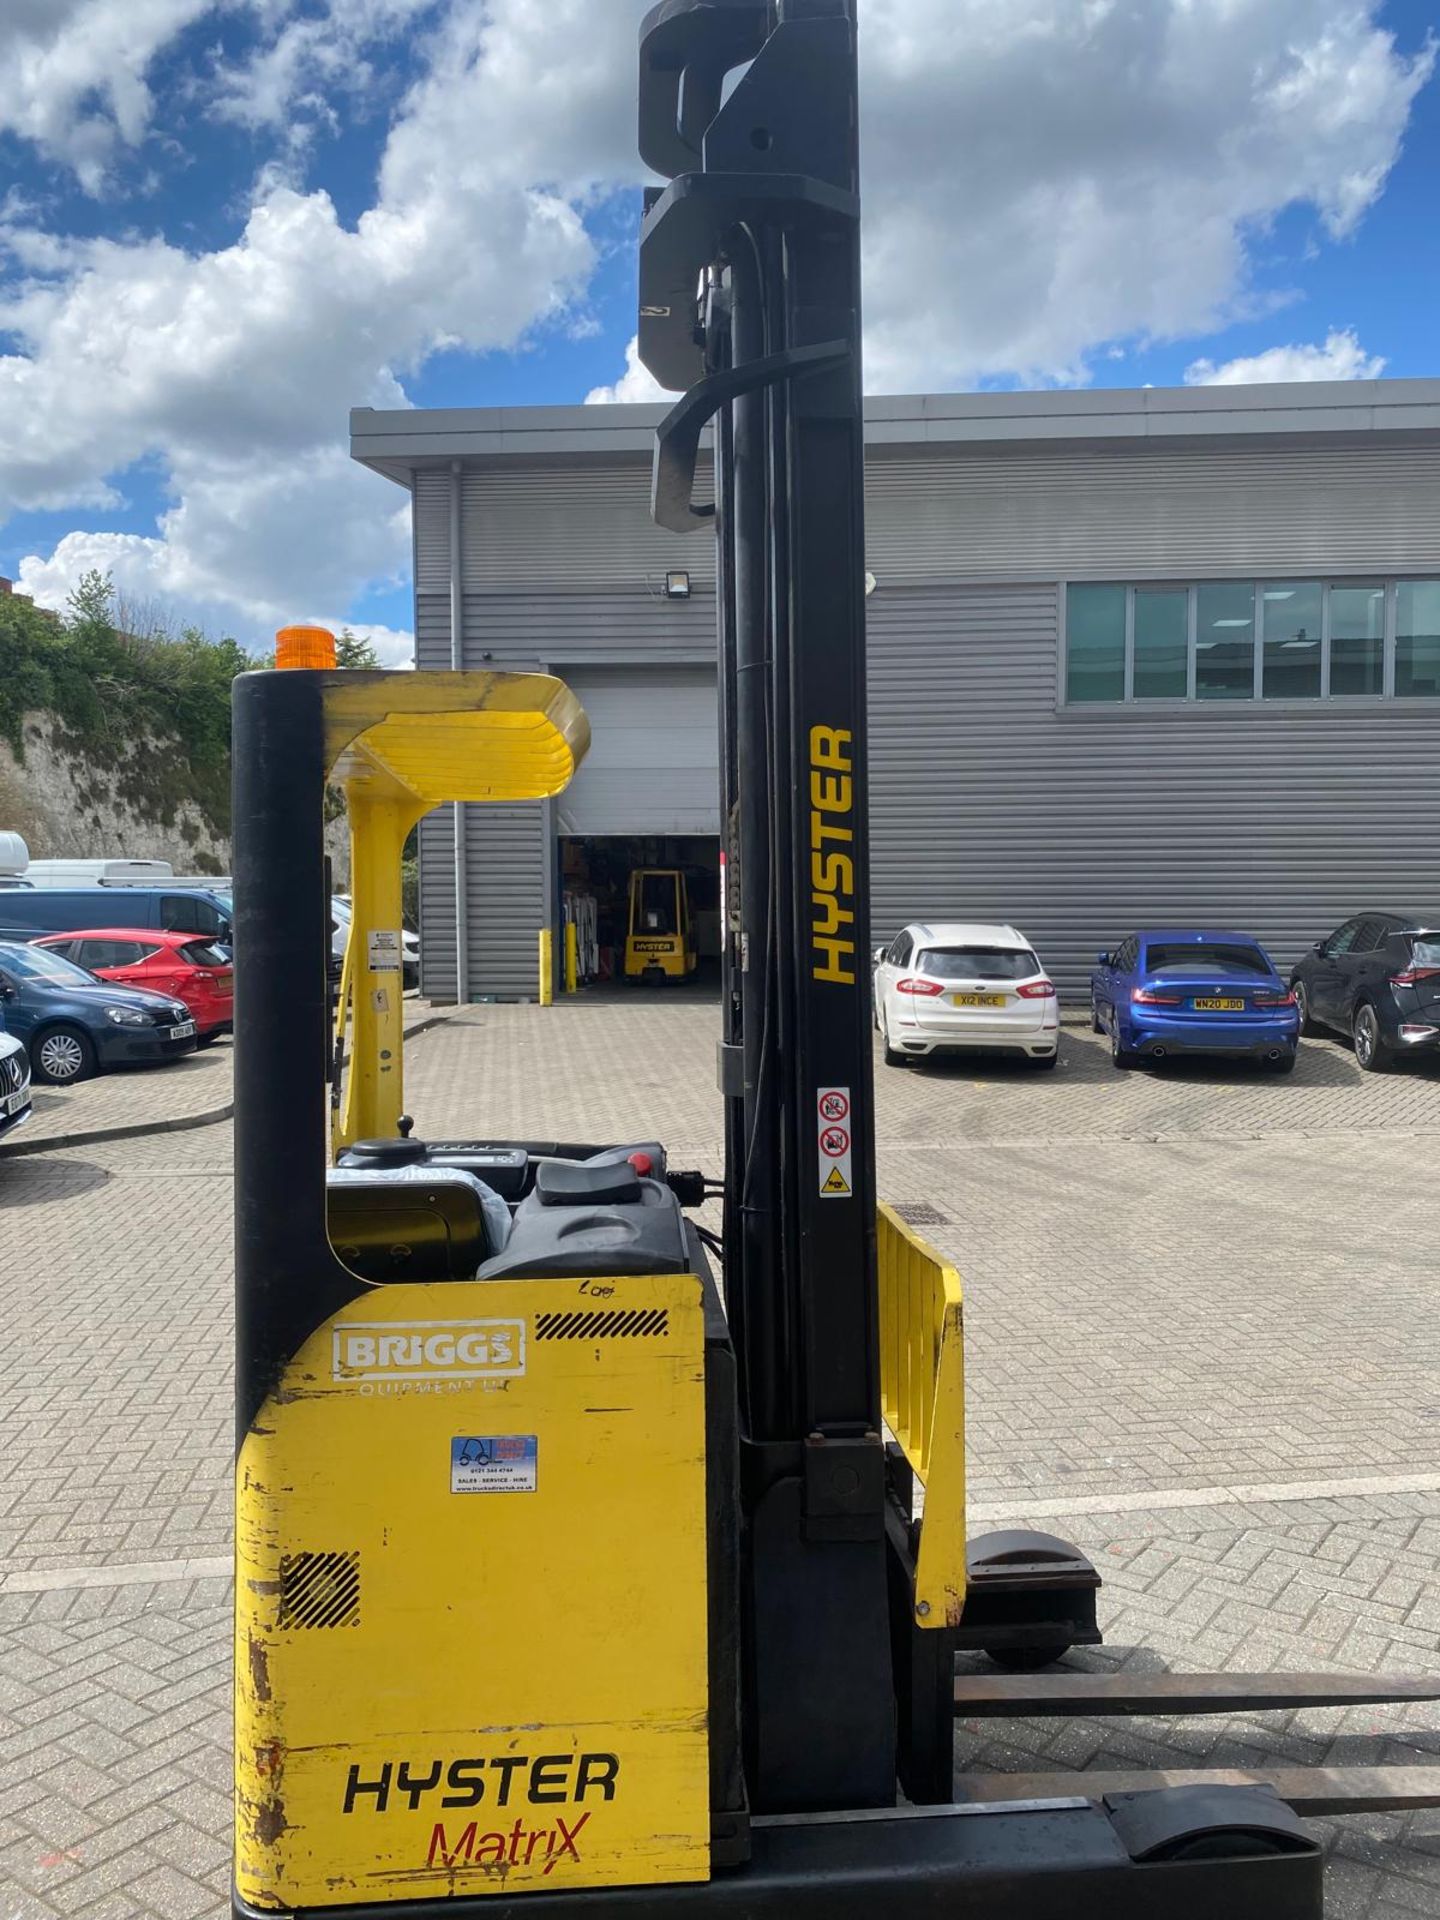 Hyster Forklift Reach Truck - Year: 2007 - 1,400kg Capacity - 8.5m Lift Height - Includes Charger - Image 8 of 10